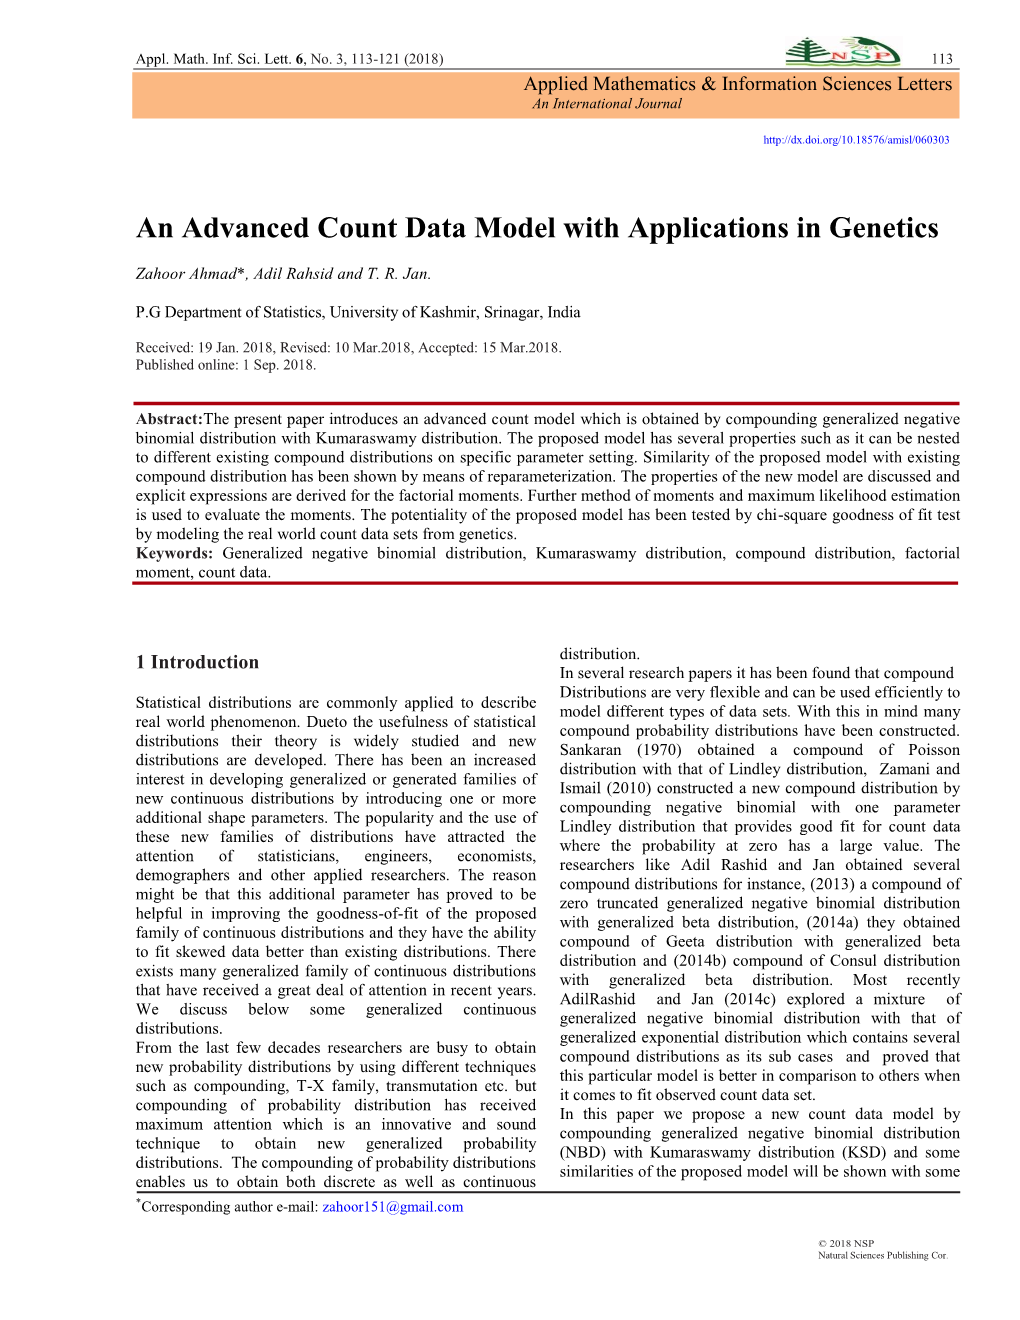 An Advanced Count Data Model with Applications in Genetics